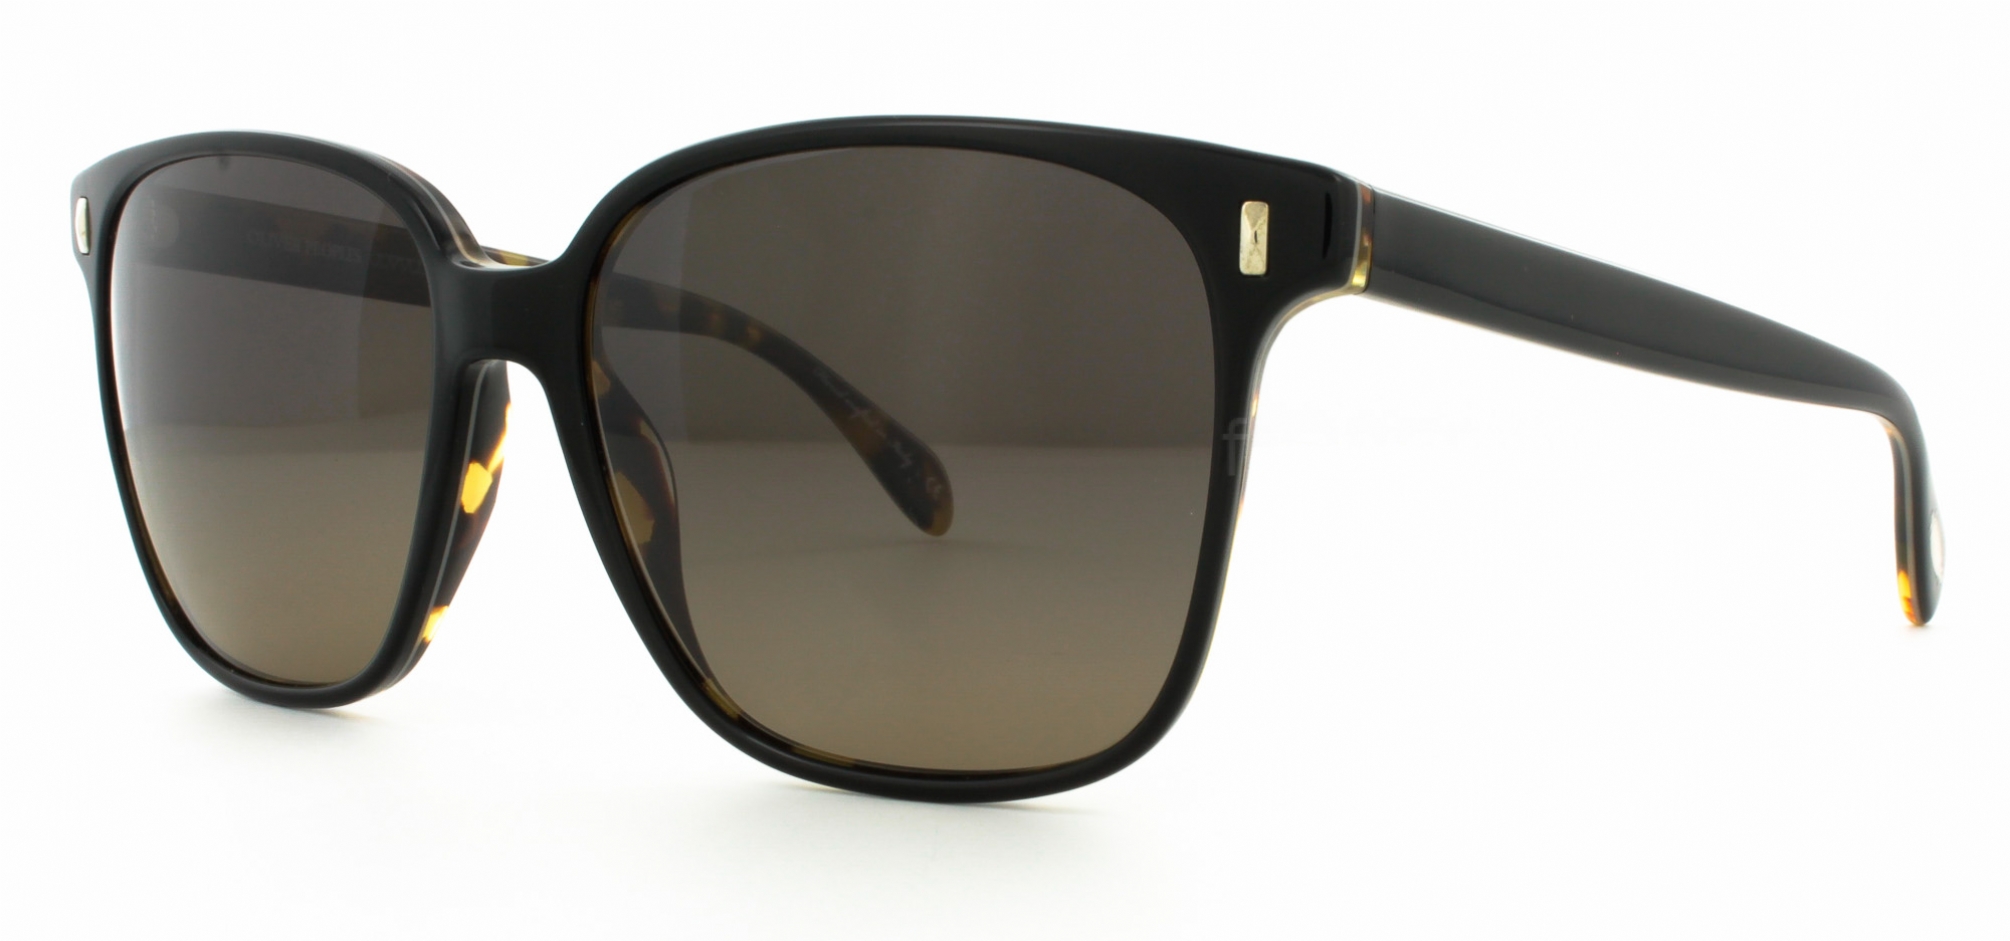 Oliver Peoples Marmont Sunglasses